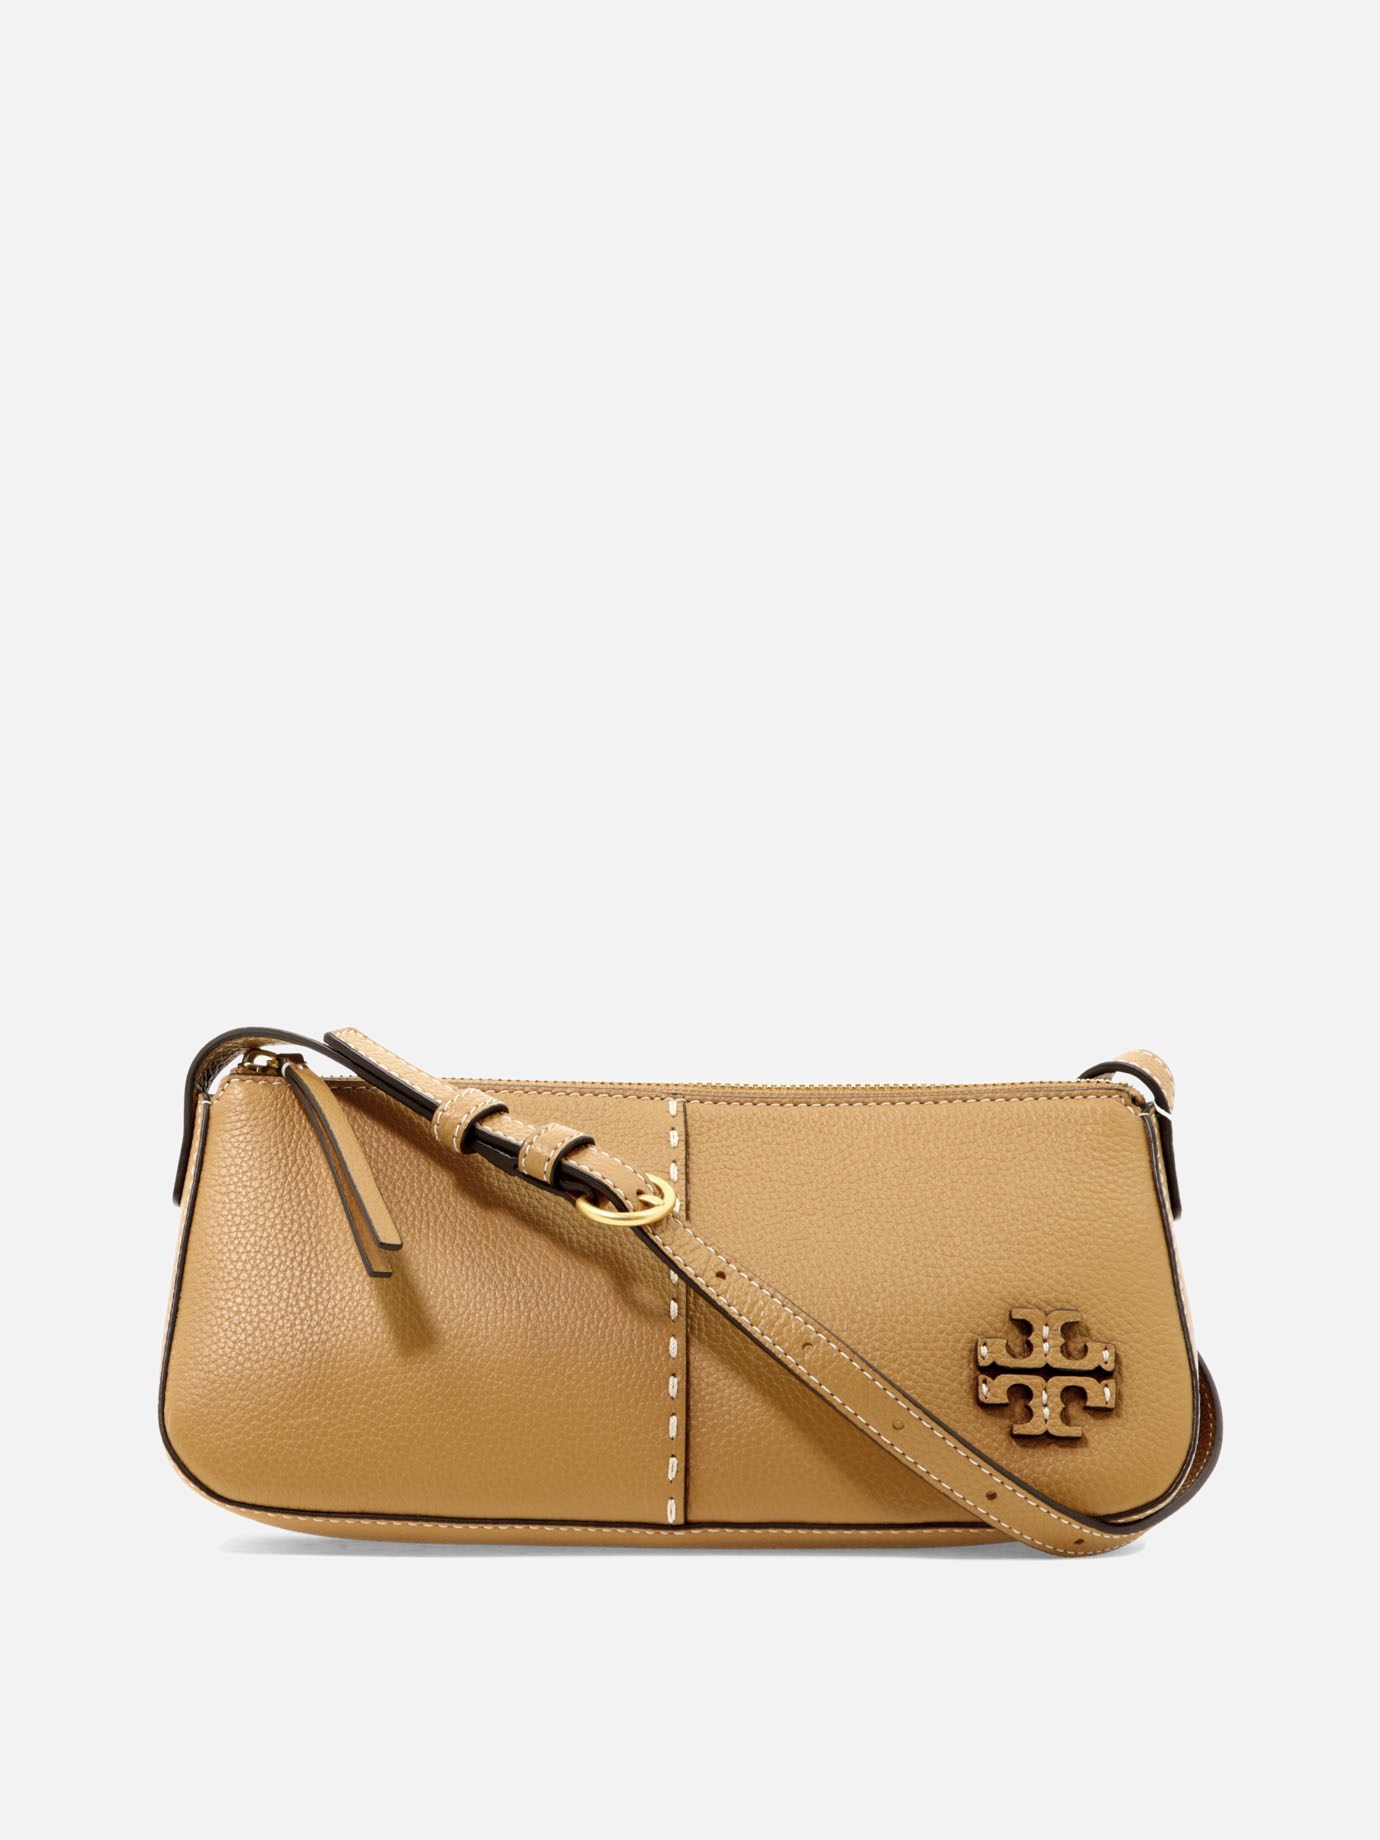  McGraw Wedge  shoulder bagby Tory Burch - 2